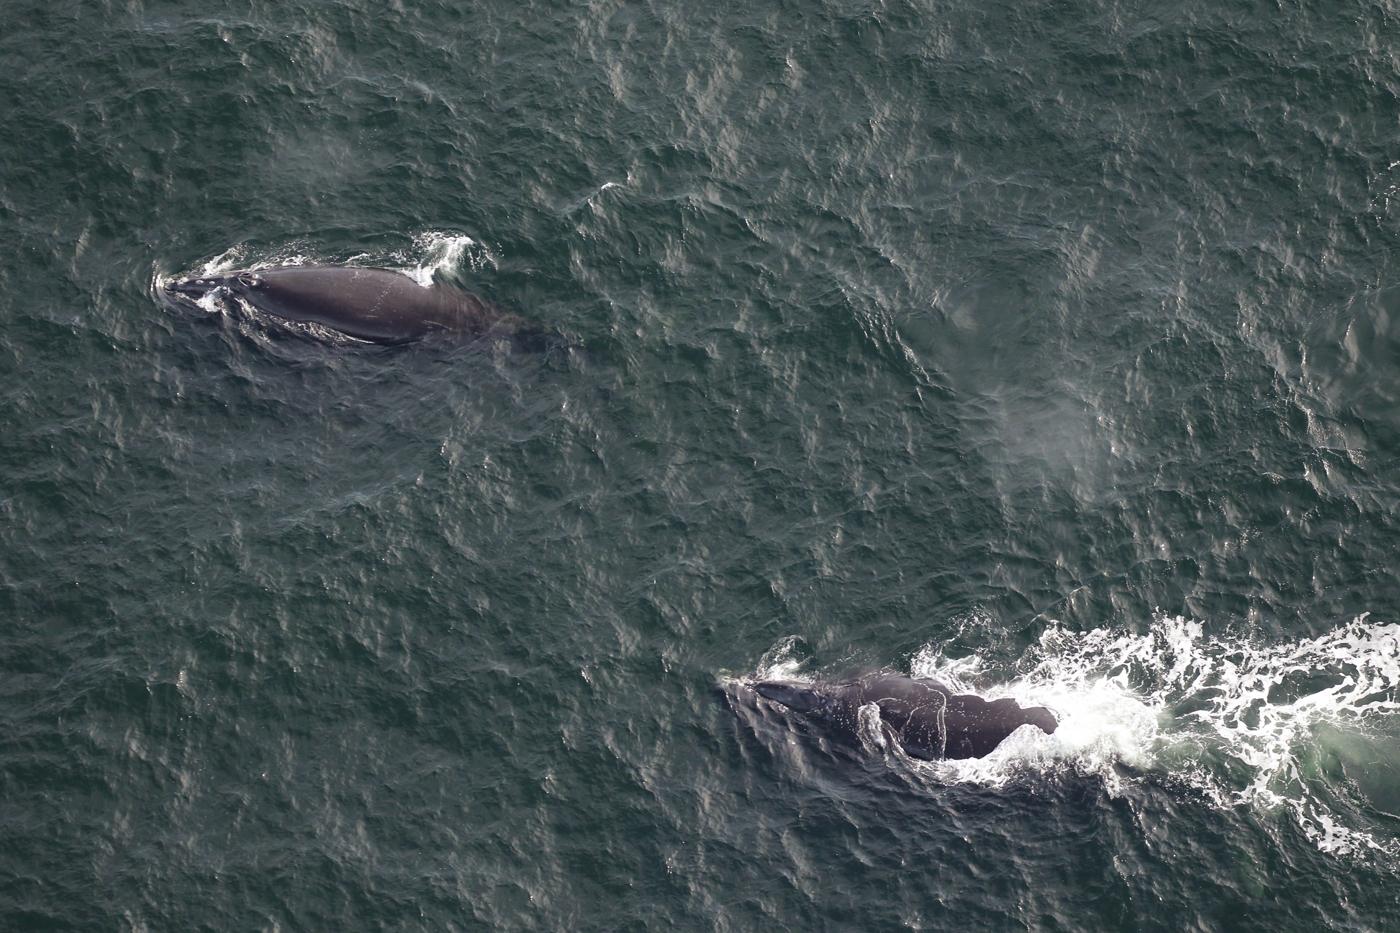 north atlantic right whales boomerang, number 2503, and magnet, number 3808, travel together southeast of tybee island off the coast of georgia